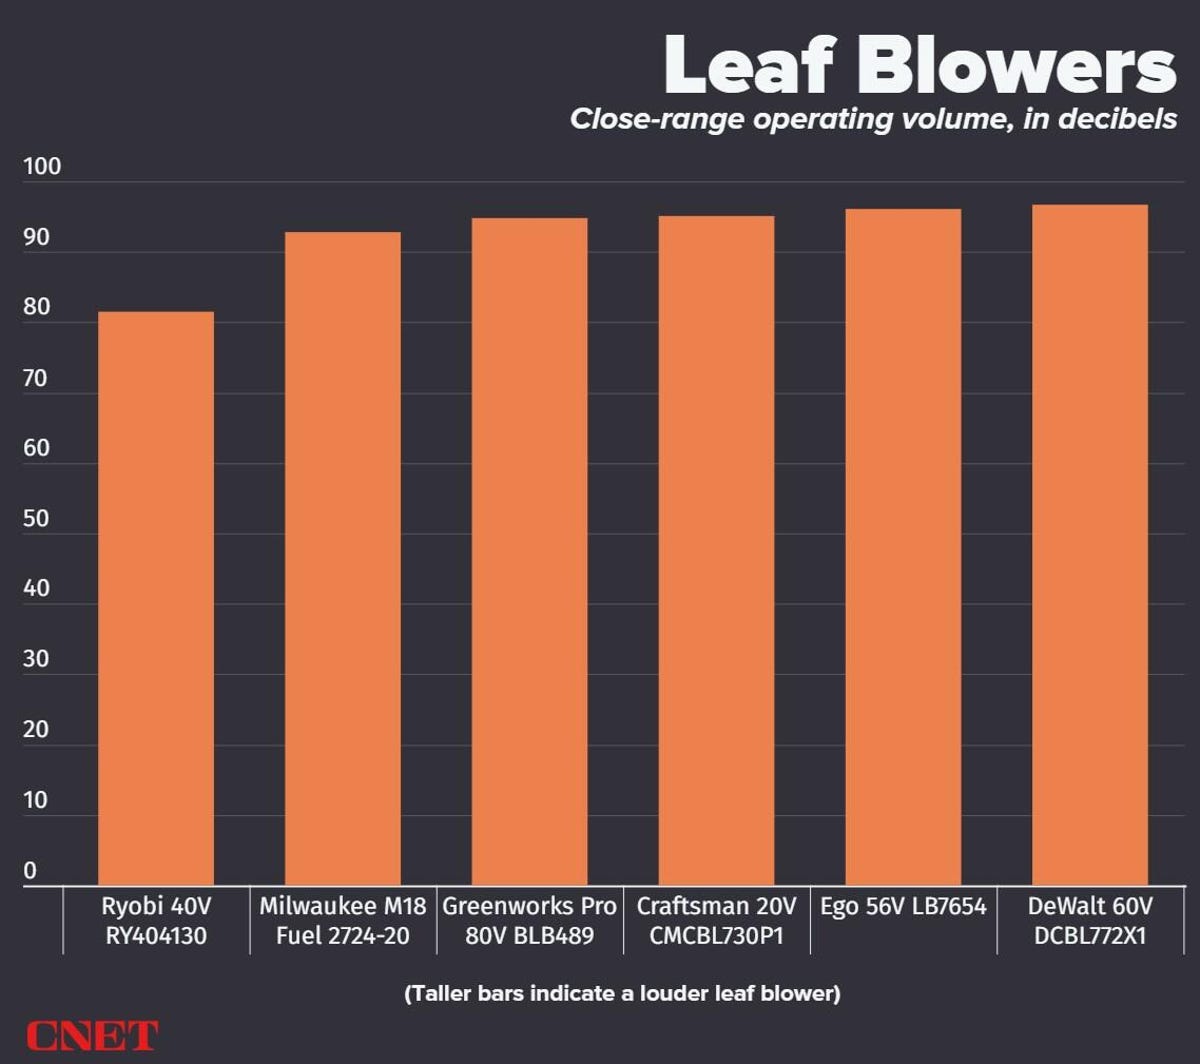 A bar graph highlights the operating volume, in decibels, of six leaf blowers. None of them are quiet, but the Ryobi 40V model rings in at 81.5 decibels, while the other five models from Craftsman, Ego, Greenworks Pro, Milwaukee, and Dewalt all measured in between 93 and 97 decibels.